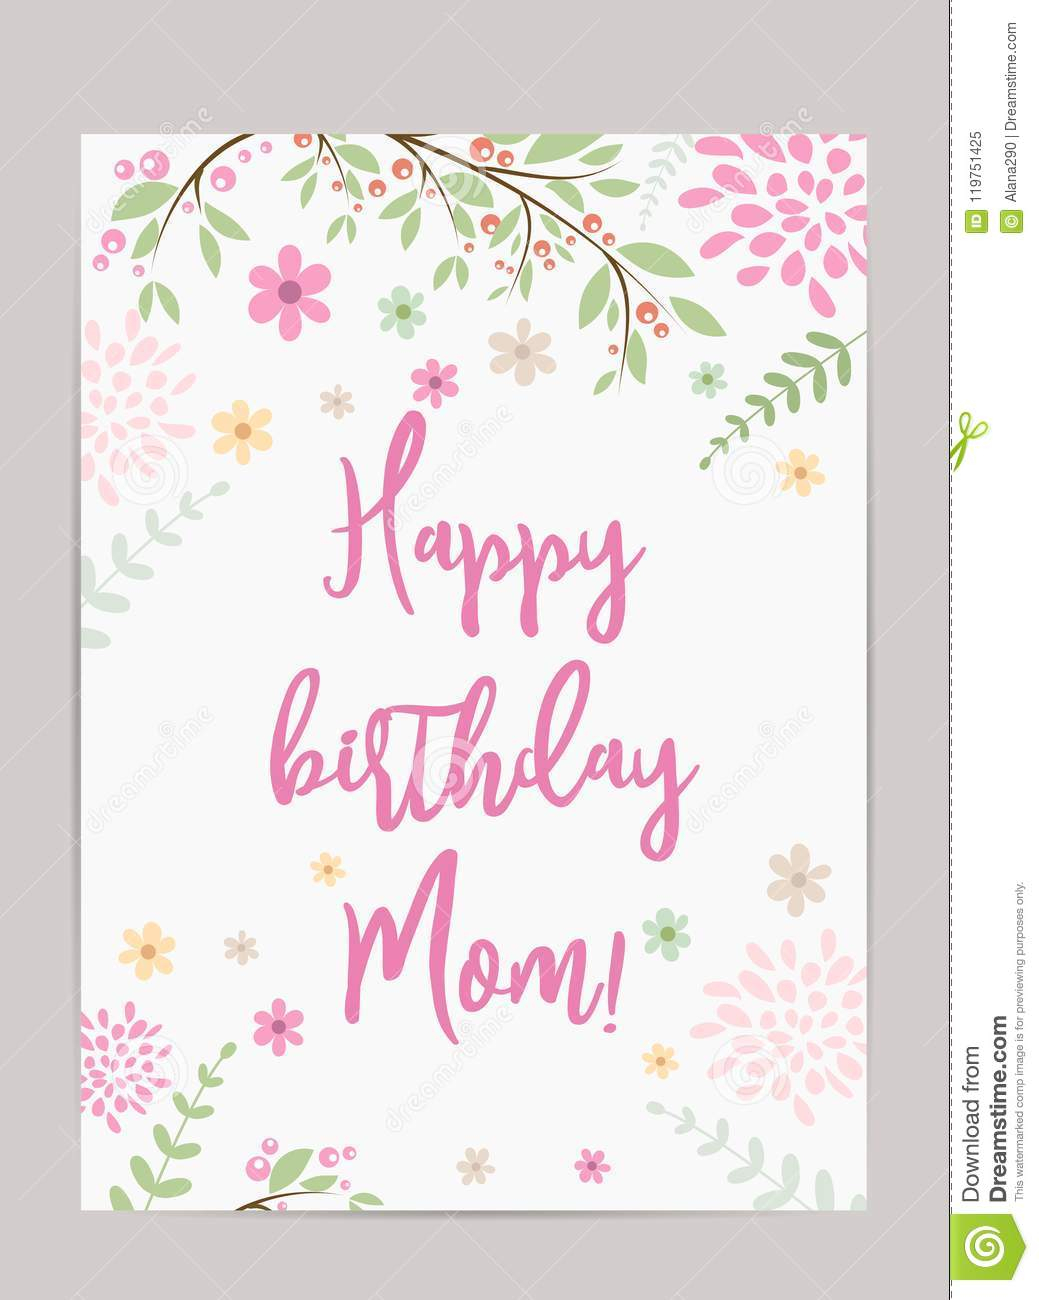 Happy Birthday Mom! Greeting Card Stock Vector Intended For Mom Birthday Card Template